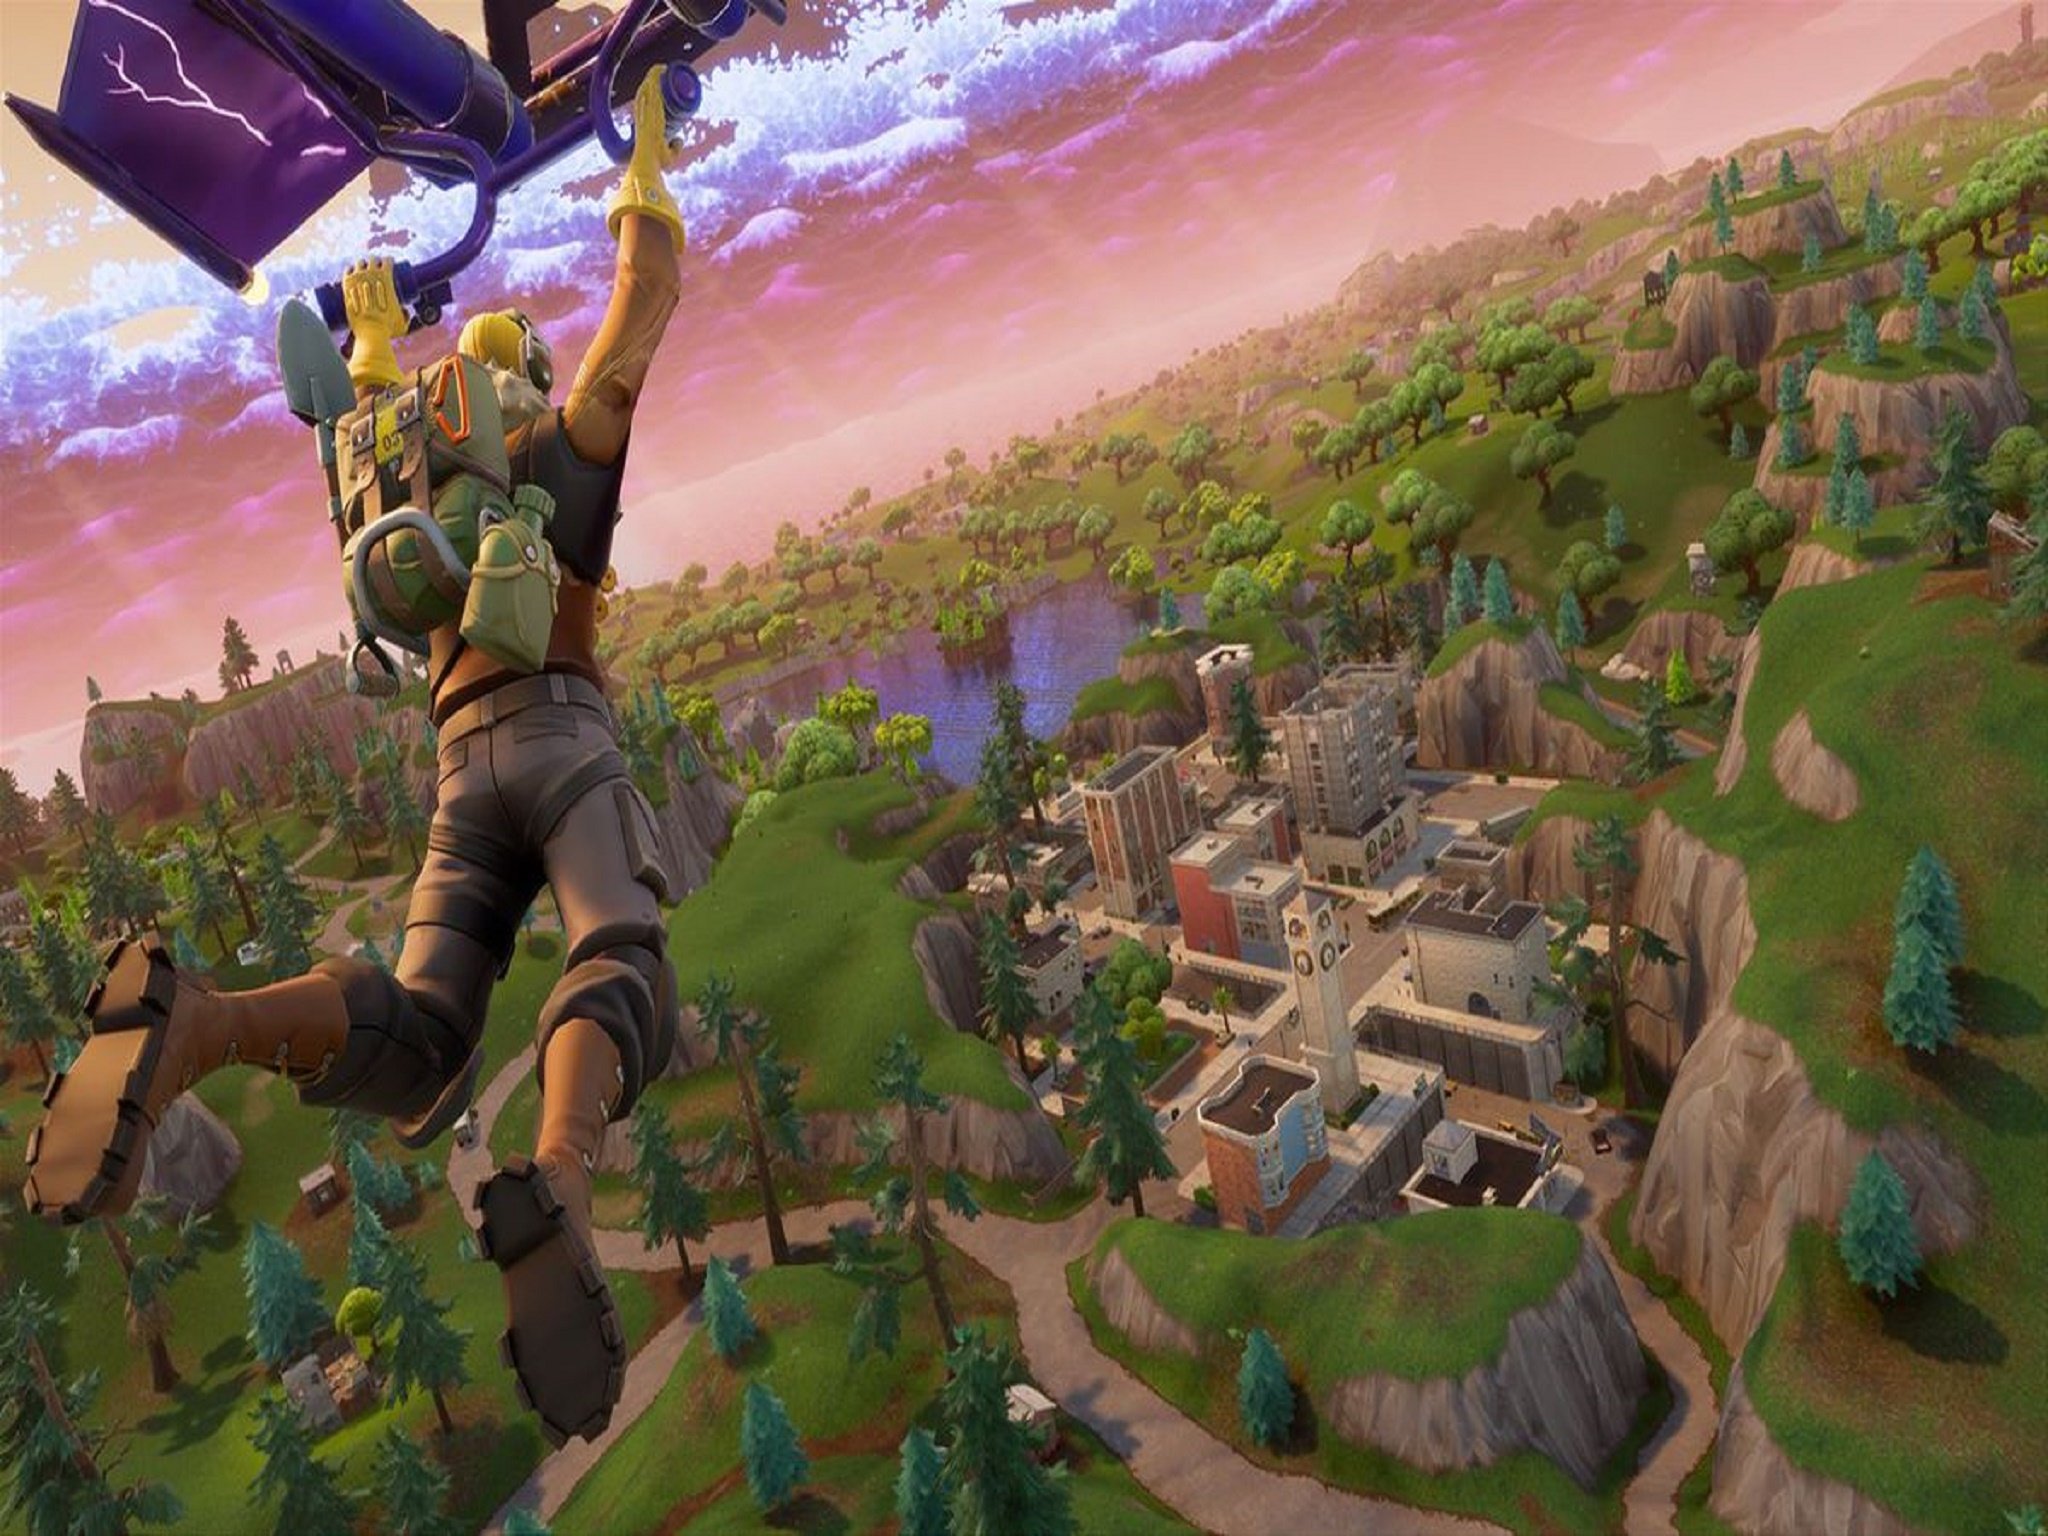 epic games working on ways to unlink fortnite accounts from consoles merge purchases from the shop - how to log out on fortnite on ps4